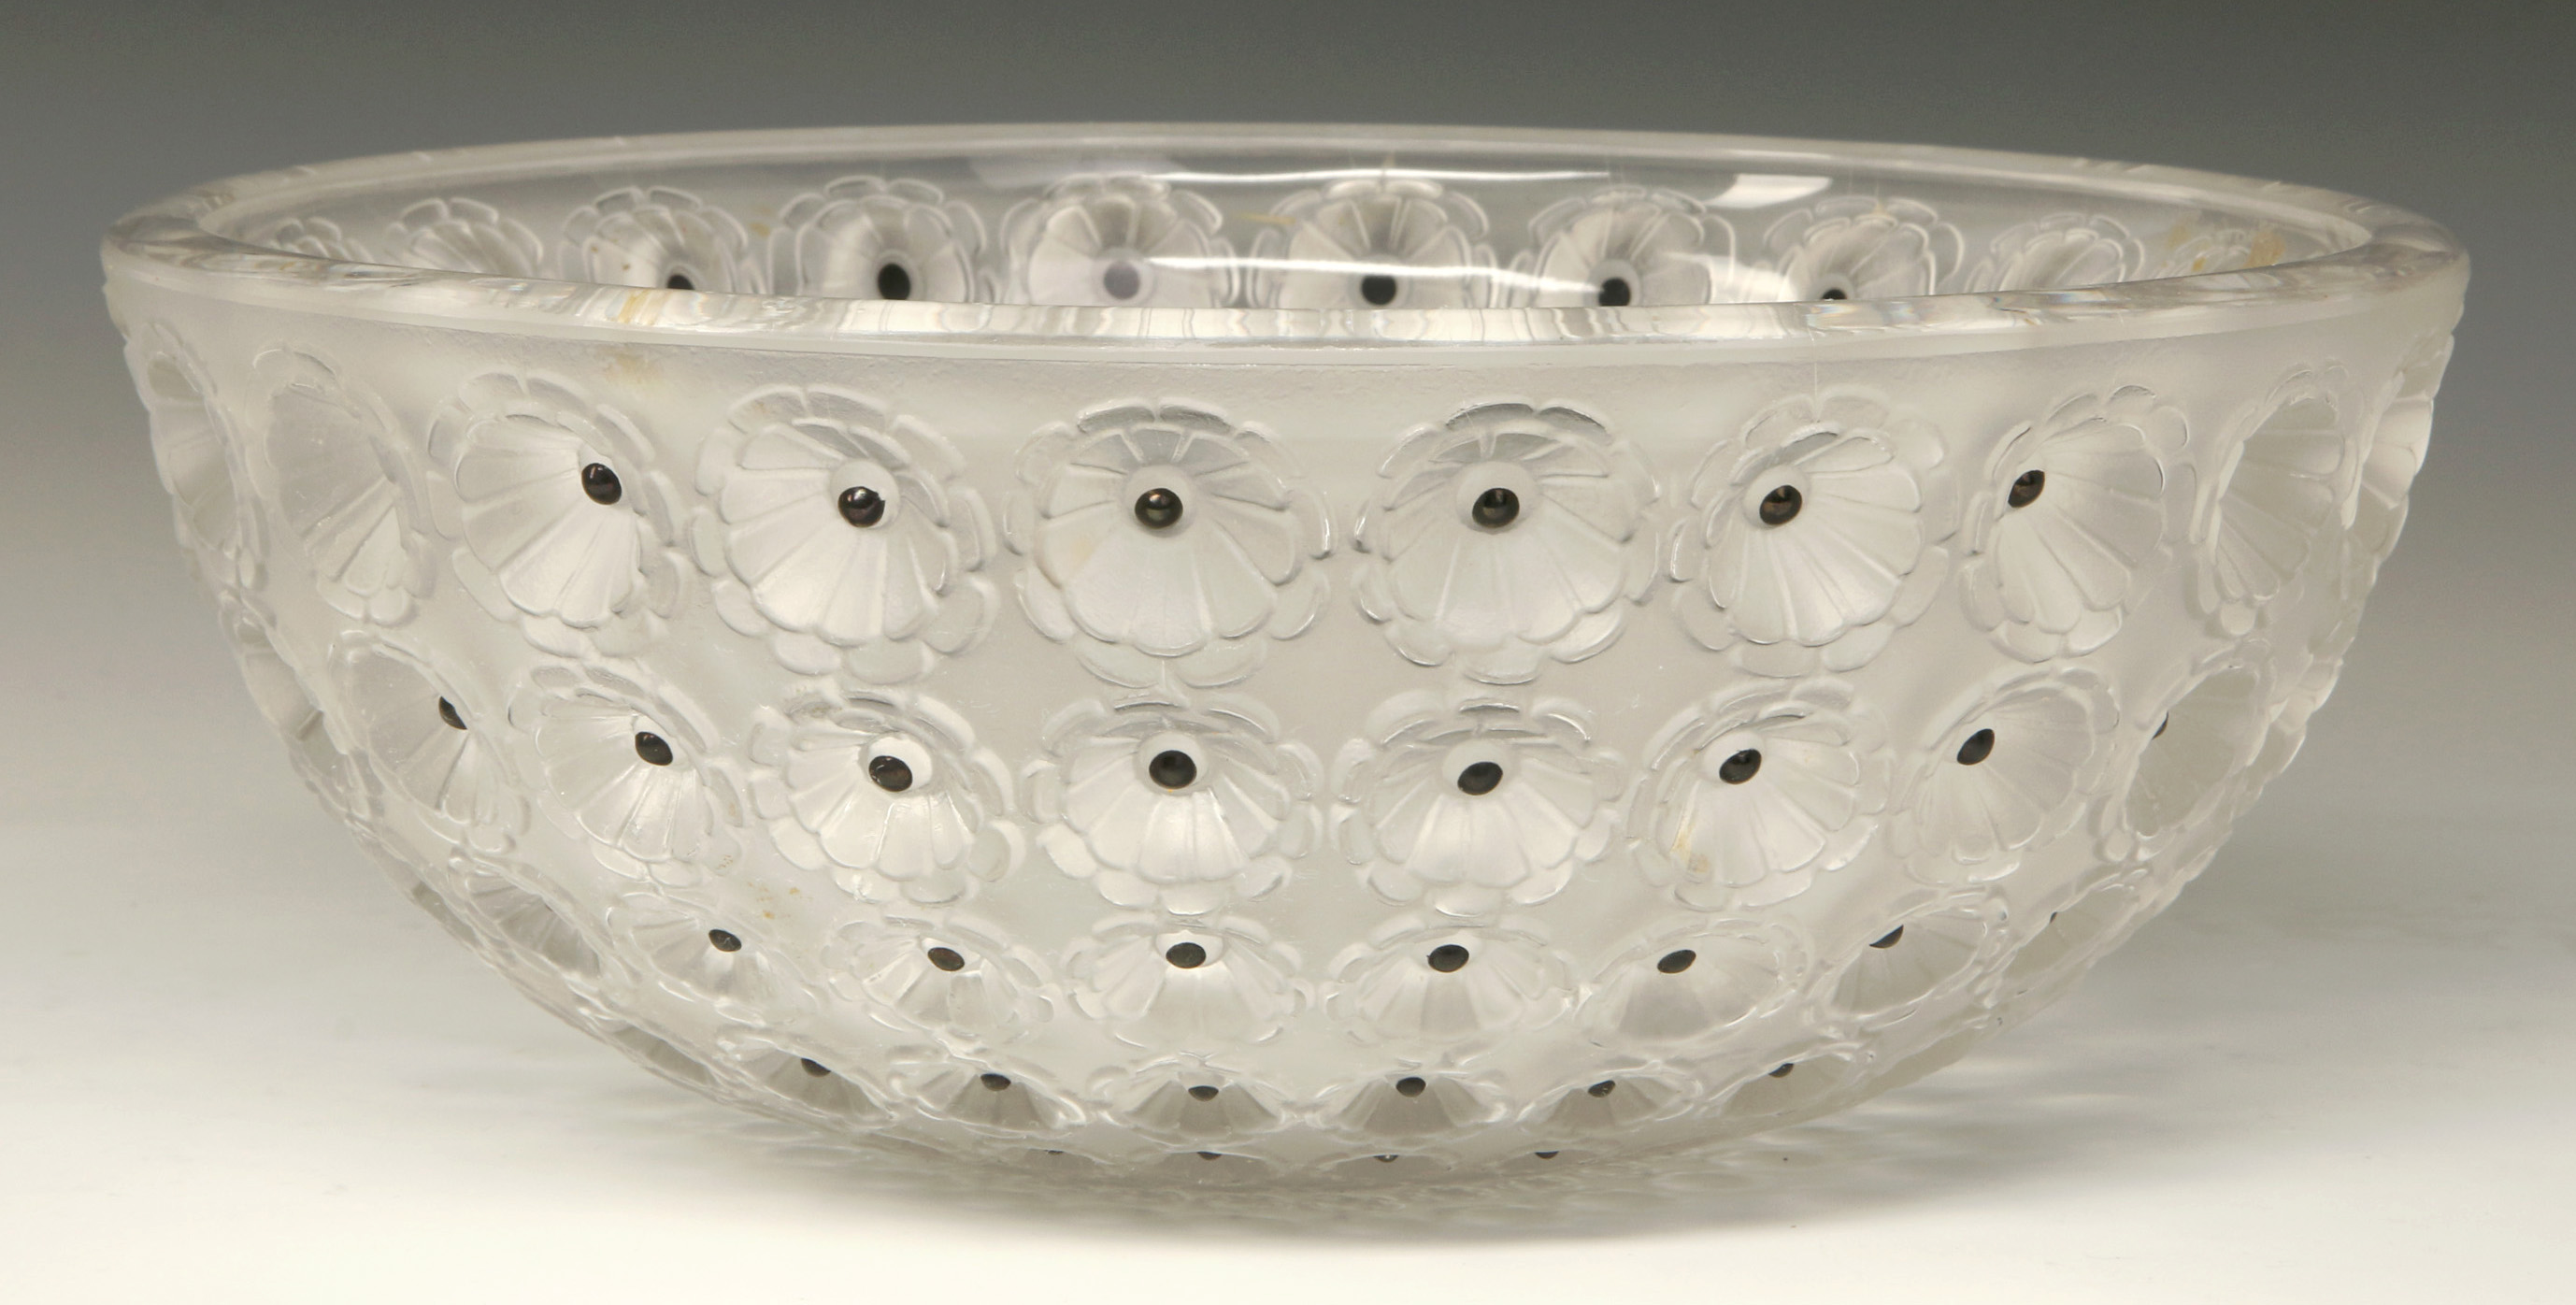 A LALIQUE FRENCH CRYSTAL 'NEMOURS' DESIGN BOWL